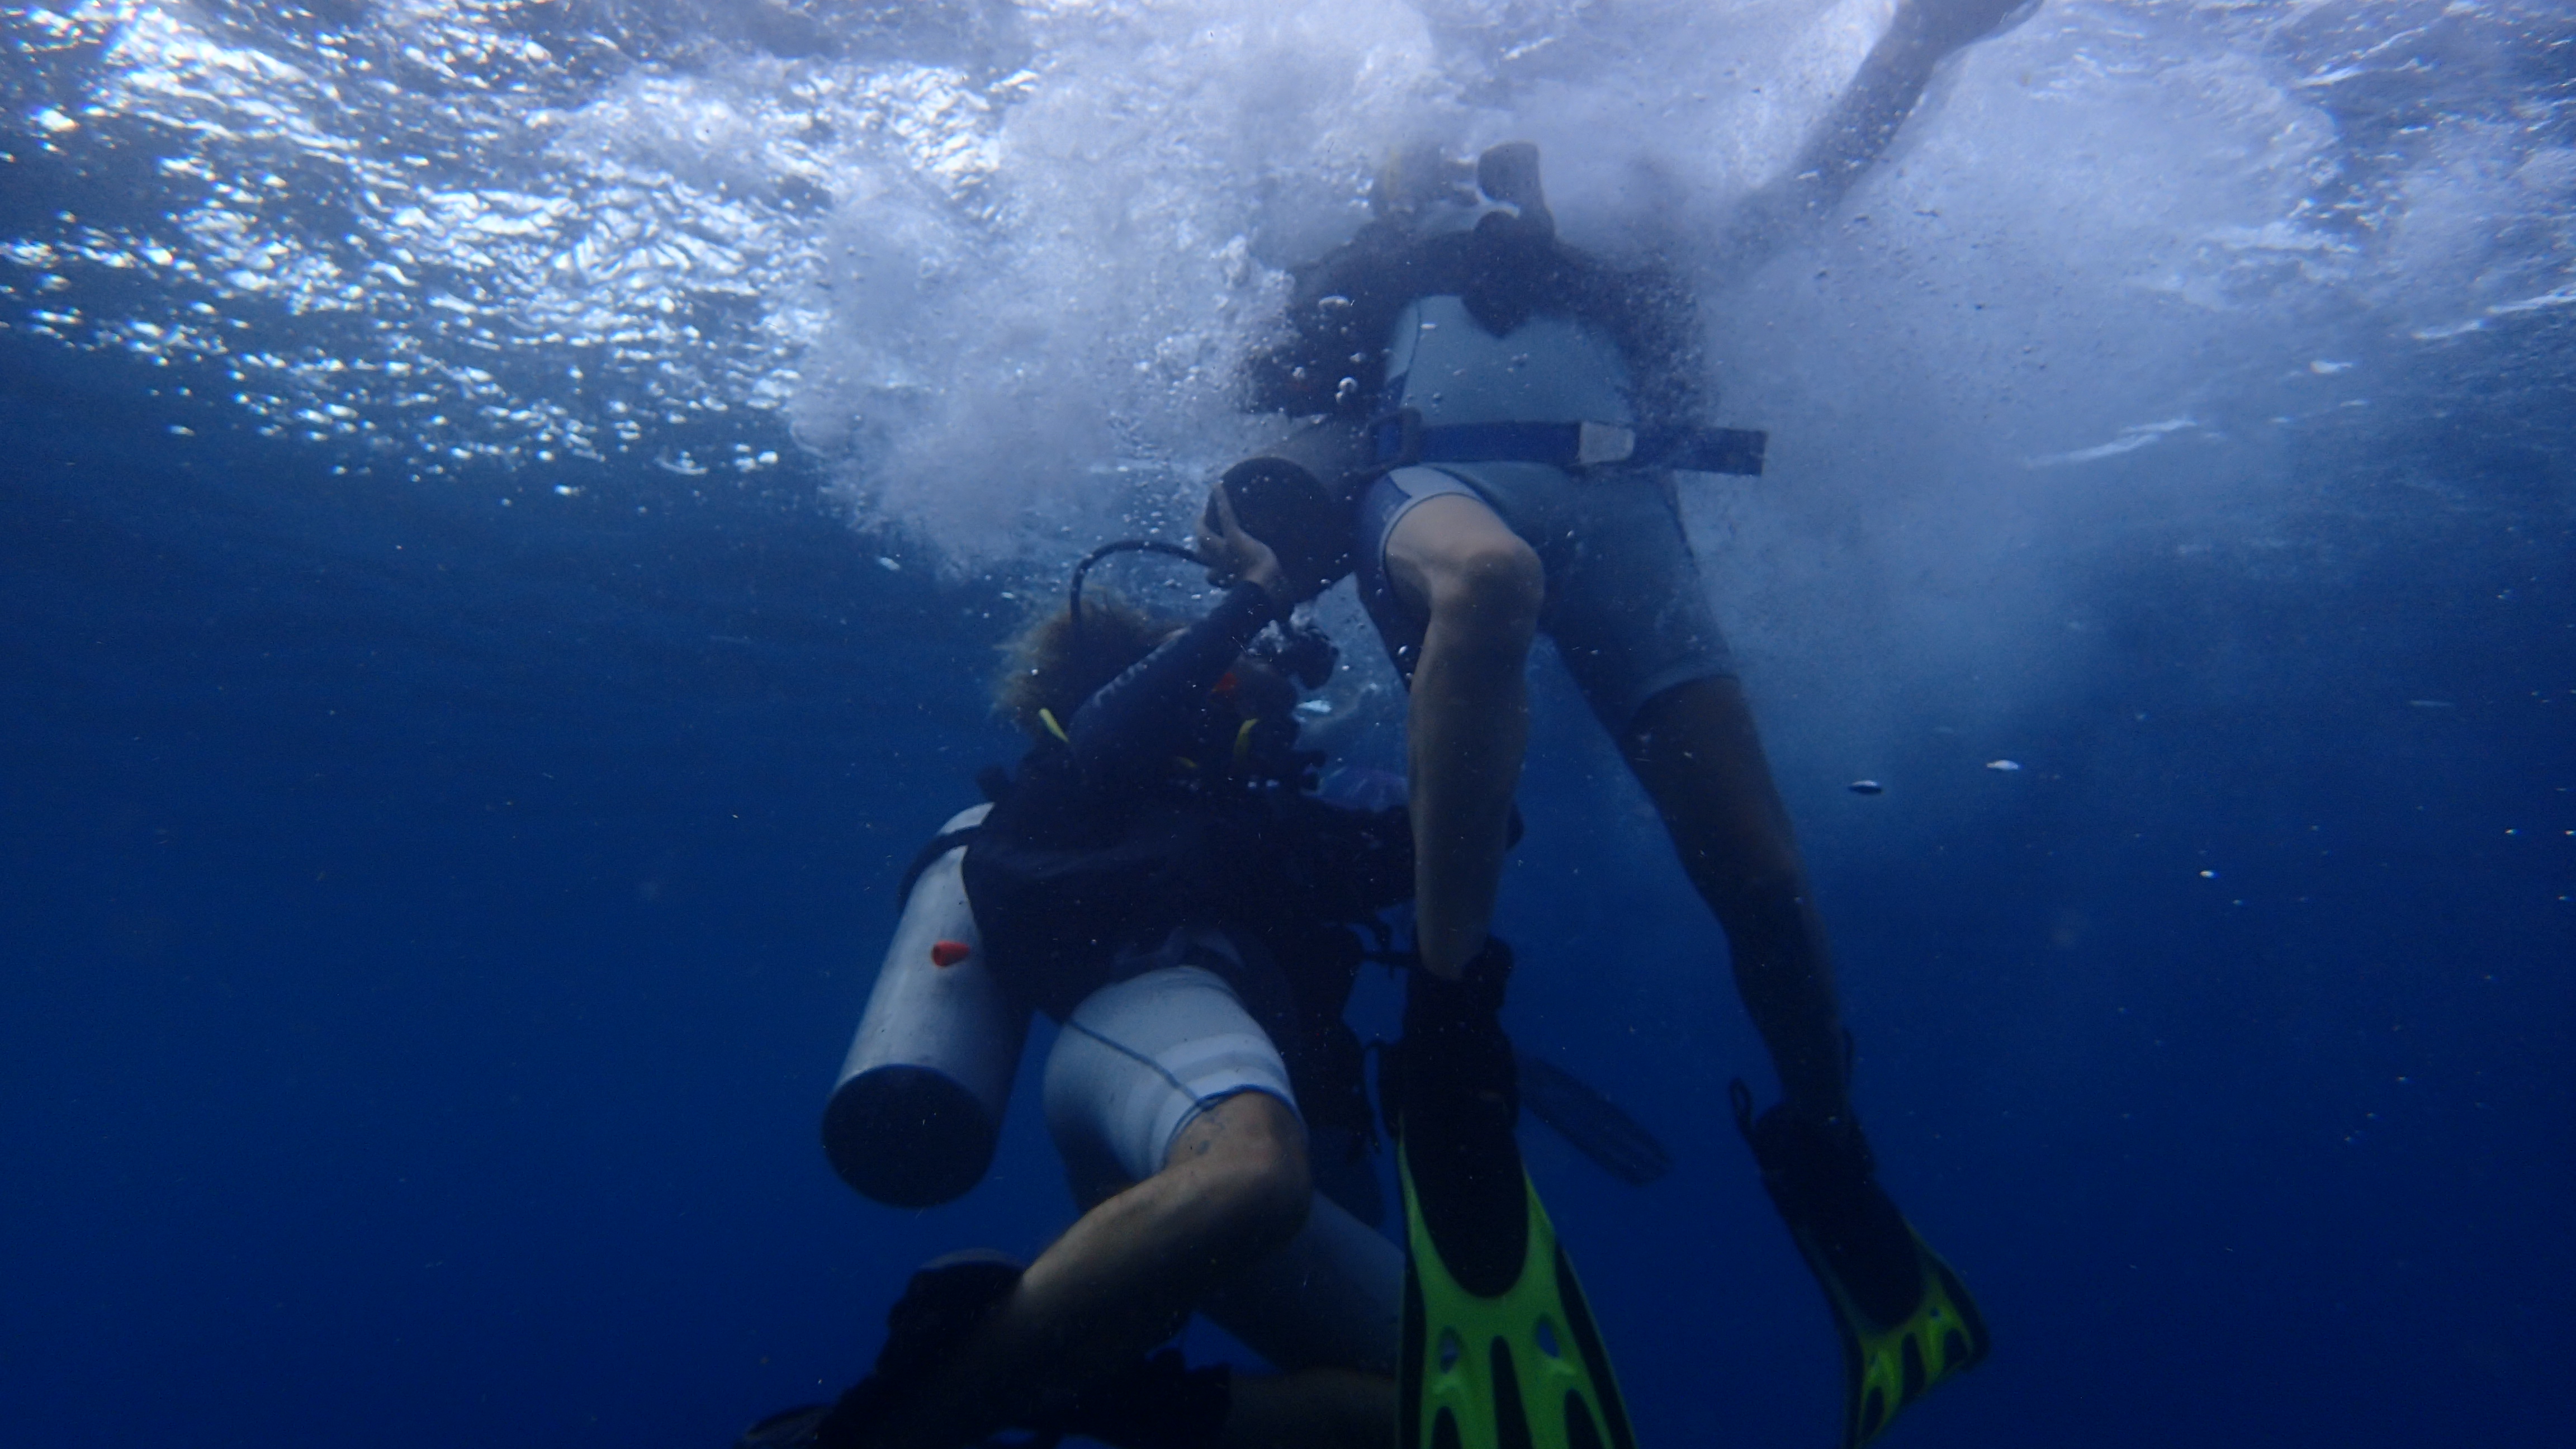 Responding to Tired diver on the surface